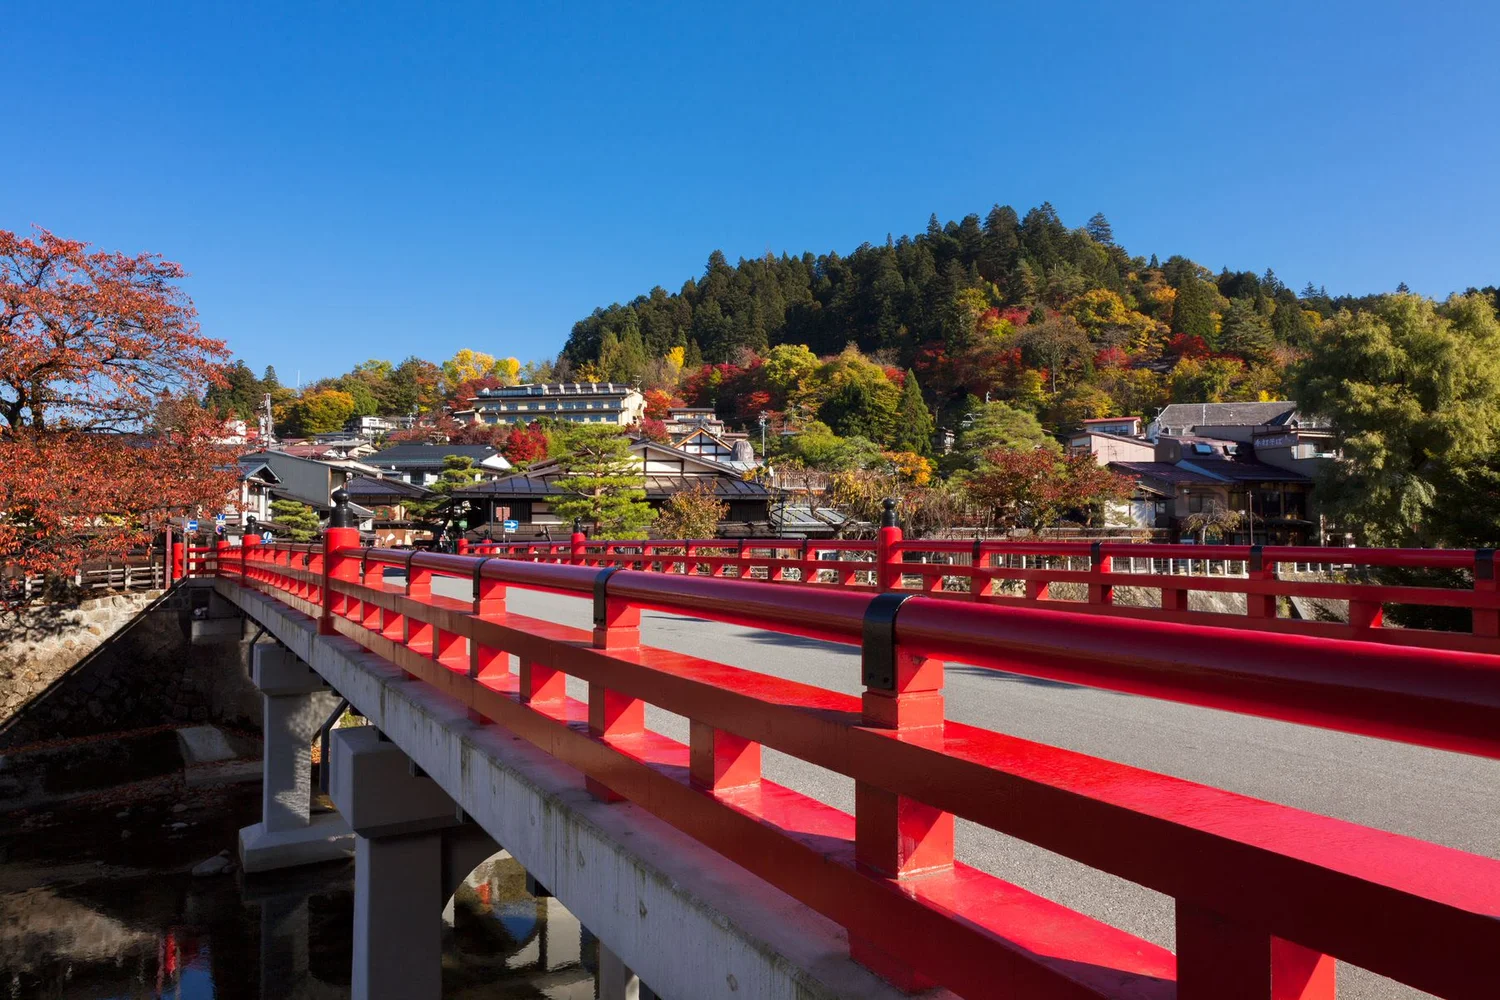 Take an Online Tour of Takayama, Gifu With a Local Guide